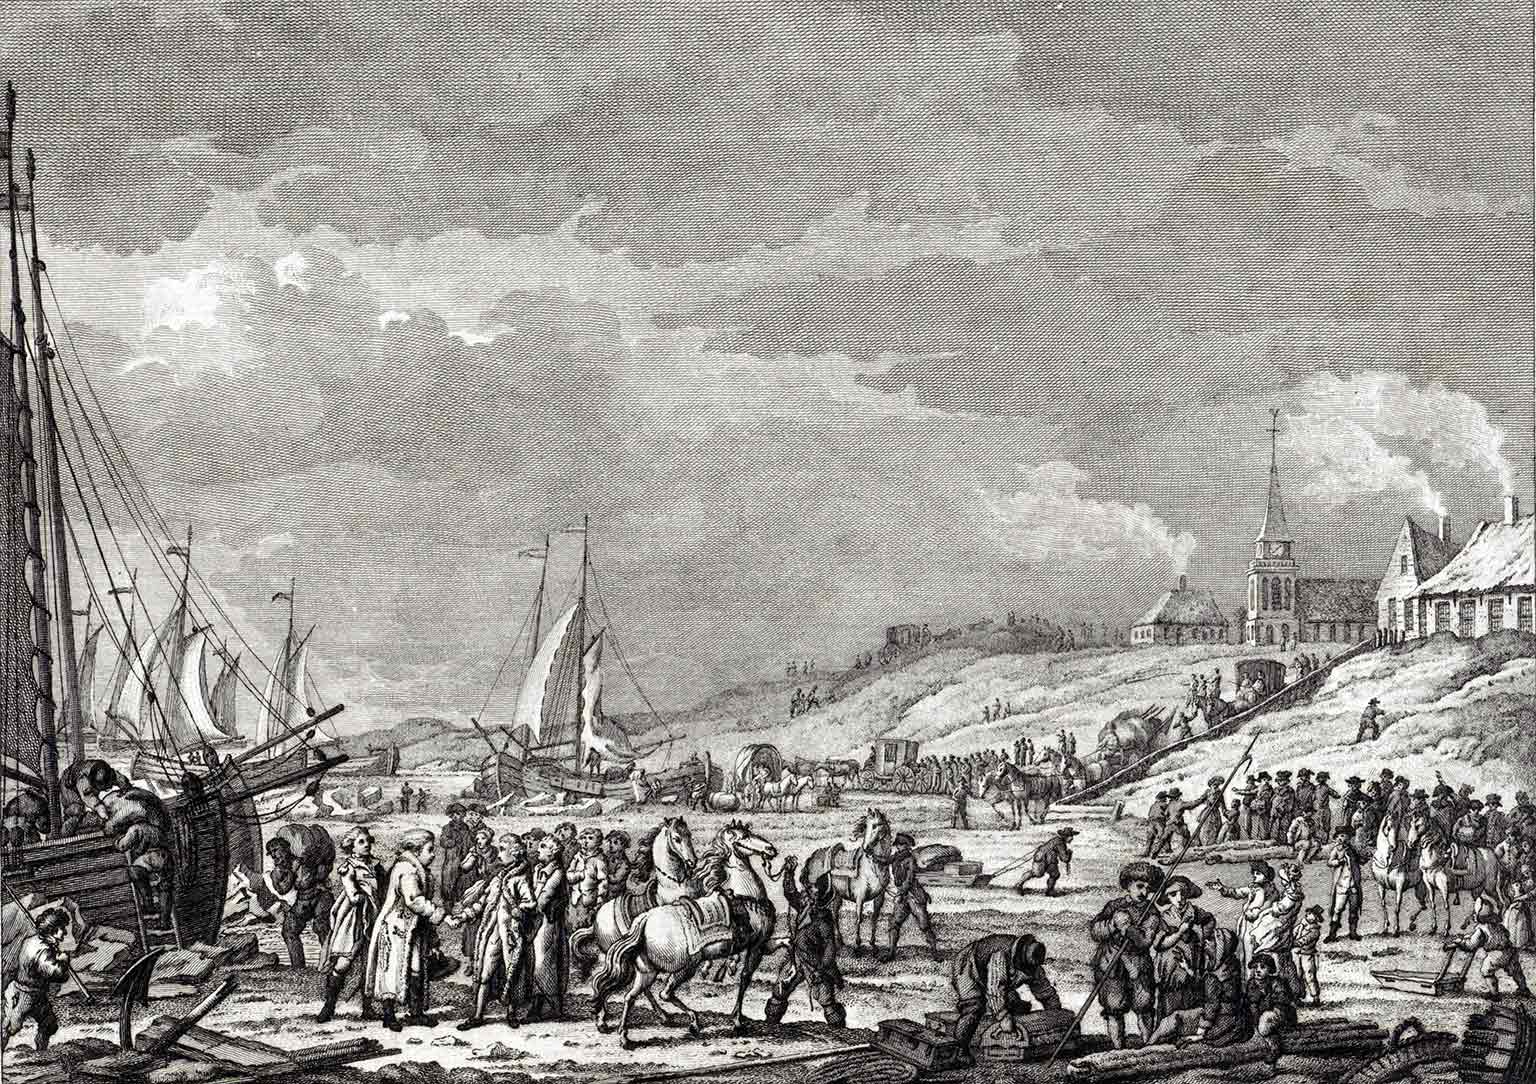 Stadtholder William V flees to England on January 18, 1795, etching by Reinier Vinkeles